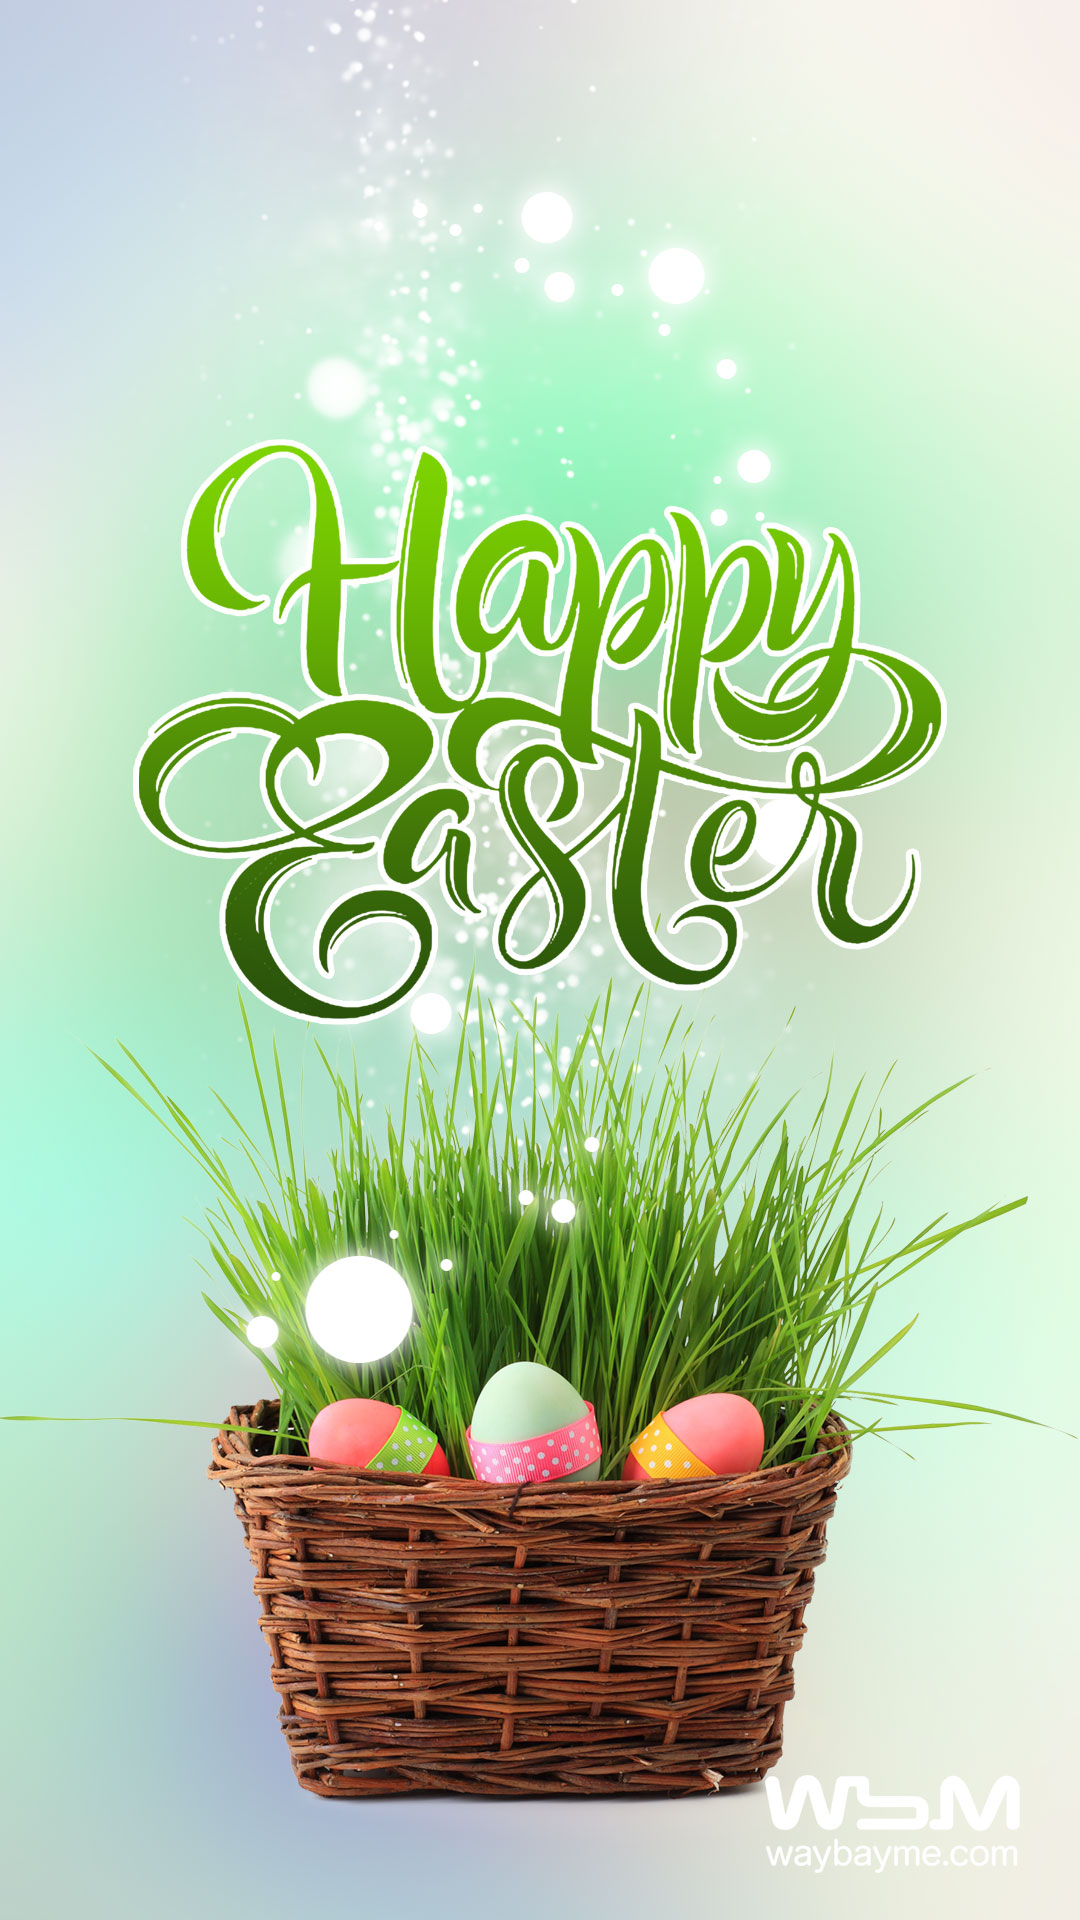 Easter Images, Easter Images HD, Easter HD Images, Easter Egg, Easter Bunny, Easter Rabbit, Easter Hare, Beautiful Easter Images, Easter Pictures, Easter Wishes, Easter Greetings, Easter Wallpapers, Best Easter Images, Easter Messages, Easter Whatsapp Status, Best Easter Greetings